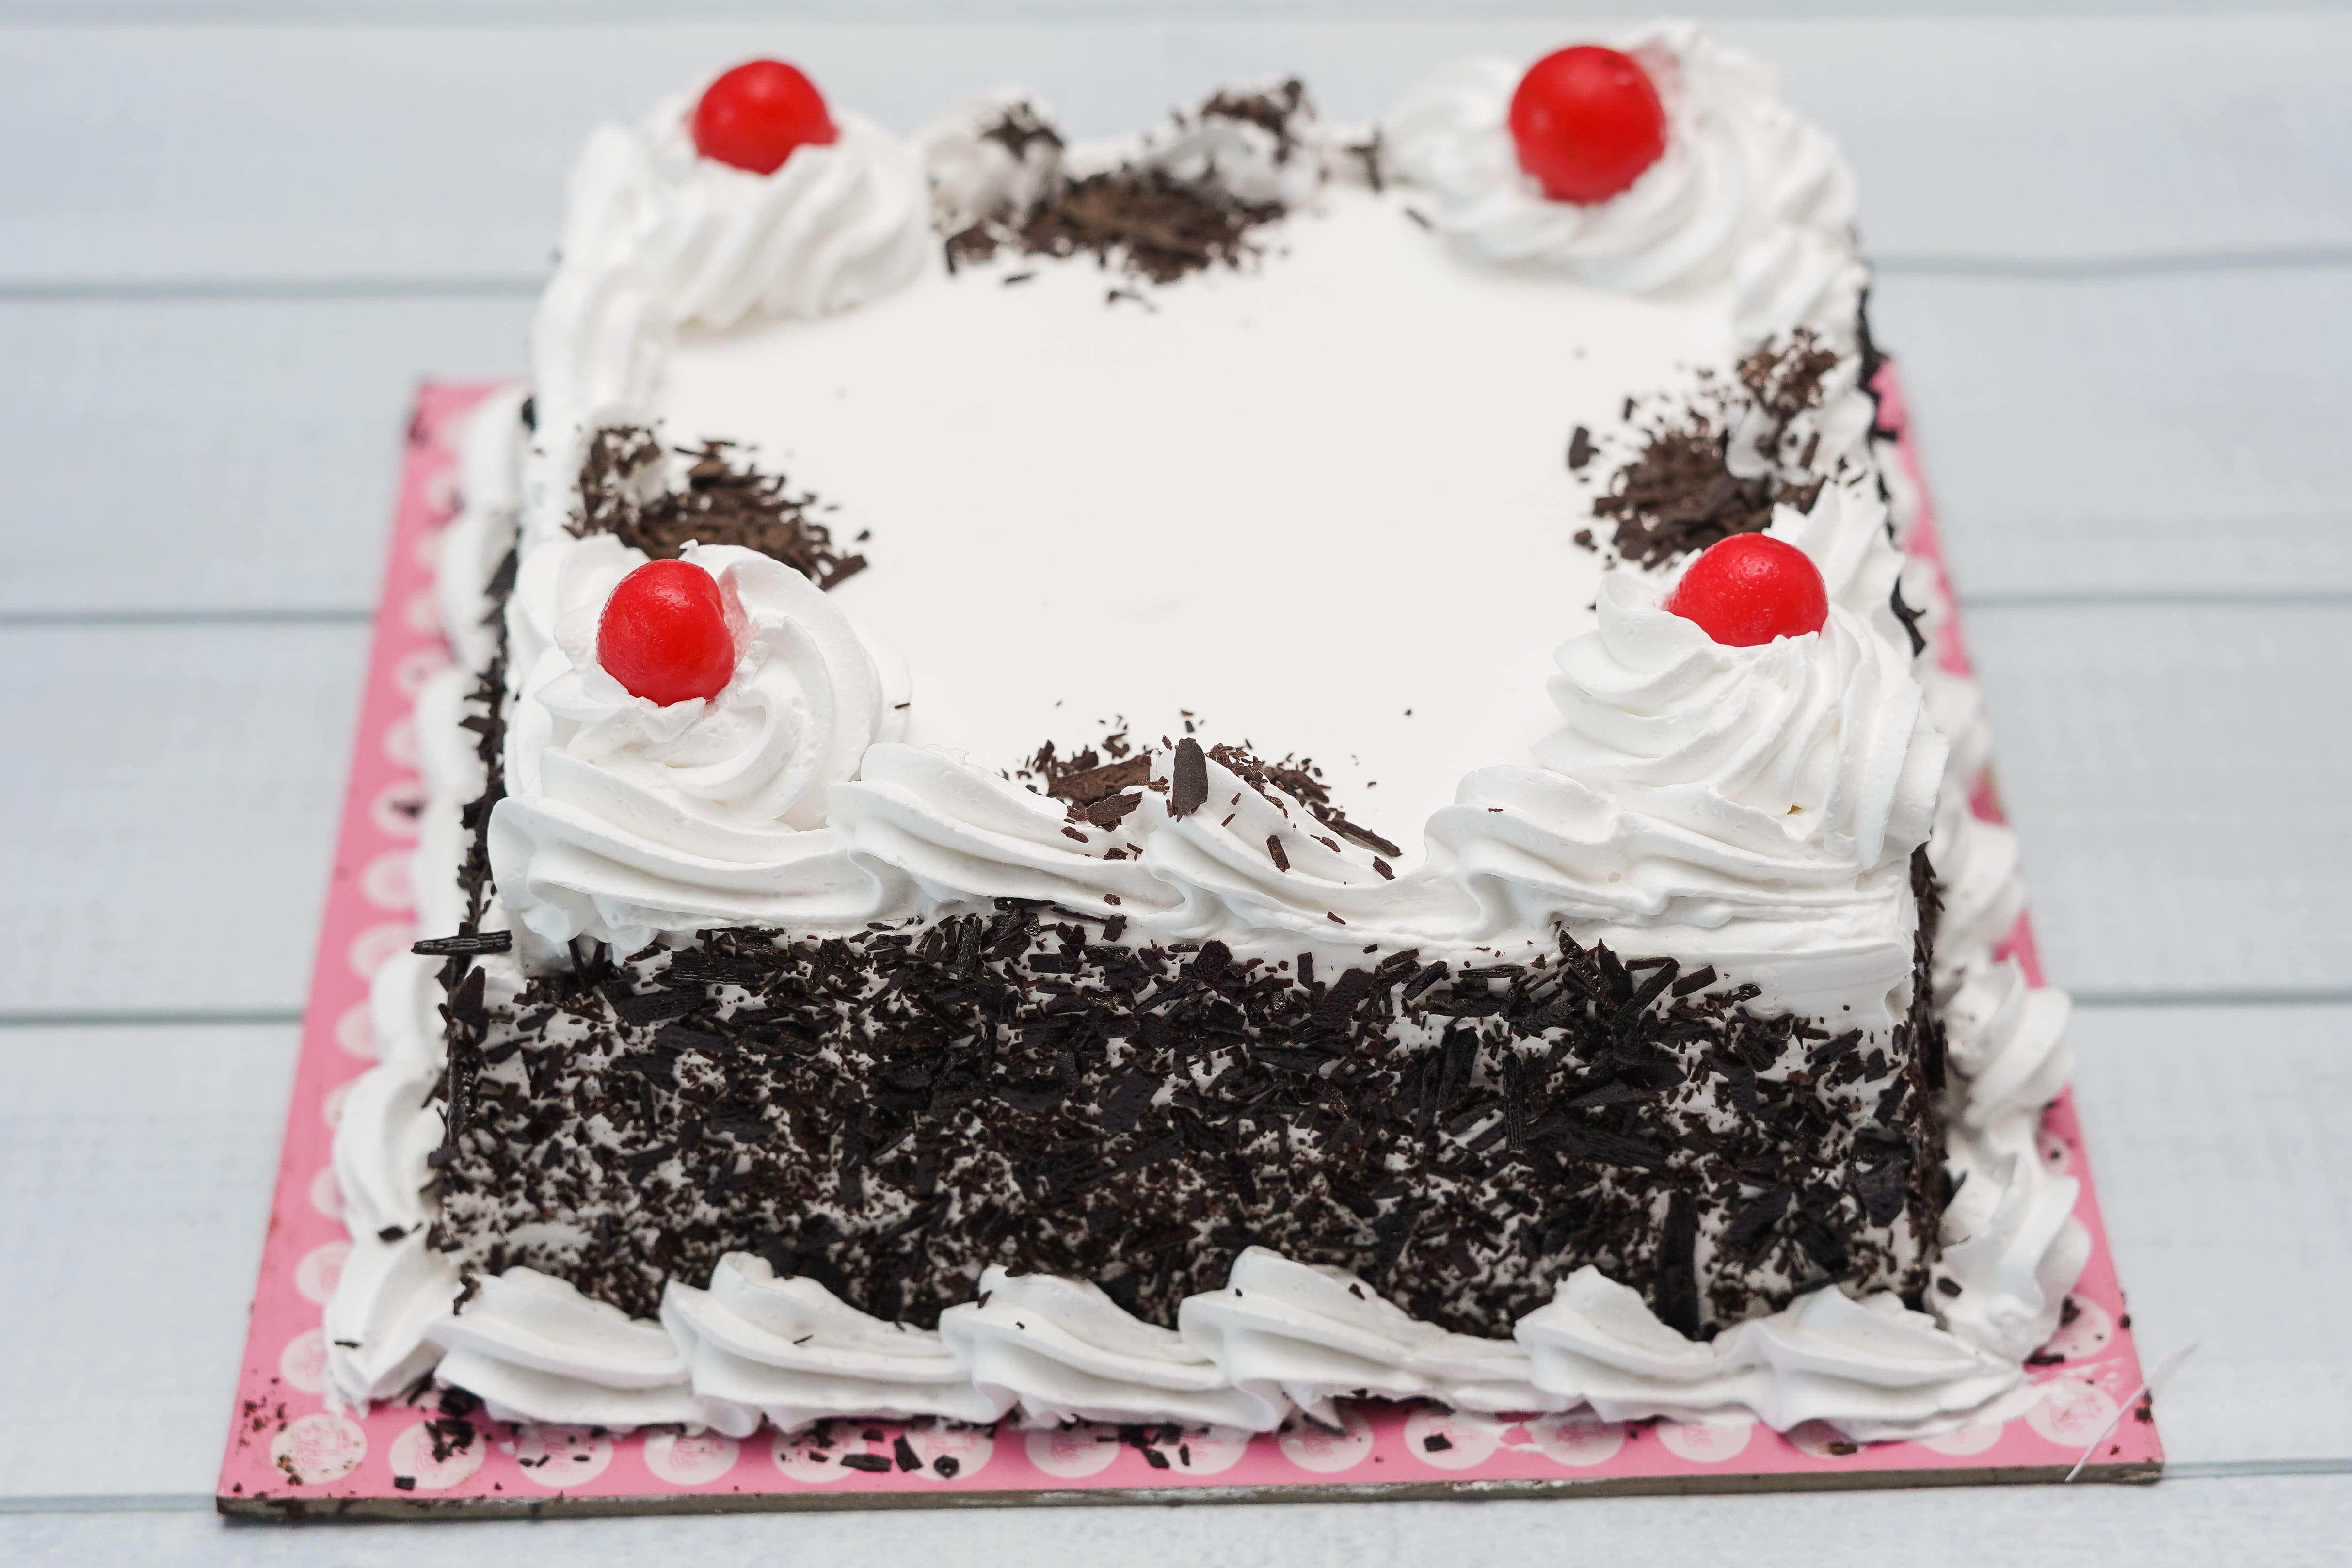 Call For Cake in Thudialur,Coimbatore - Best Cake Shops in Coimbatore -  Justdial